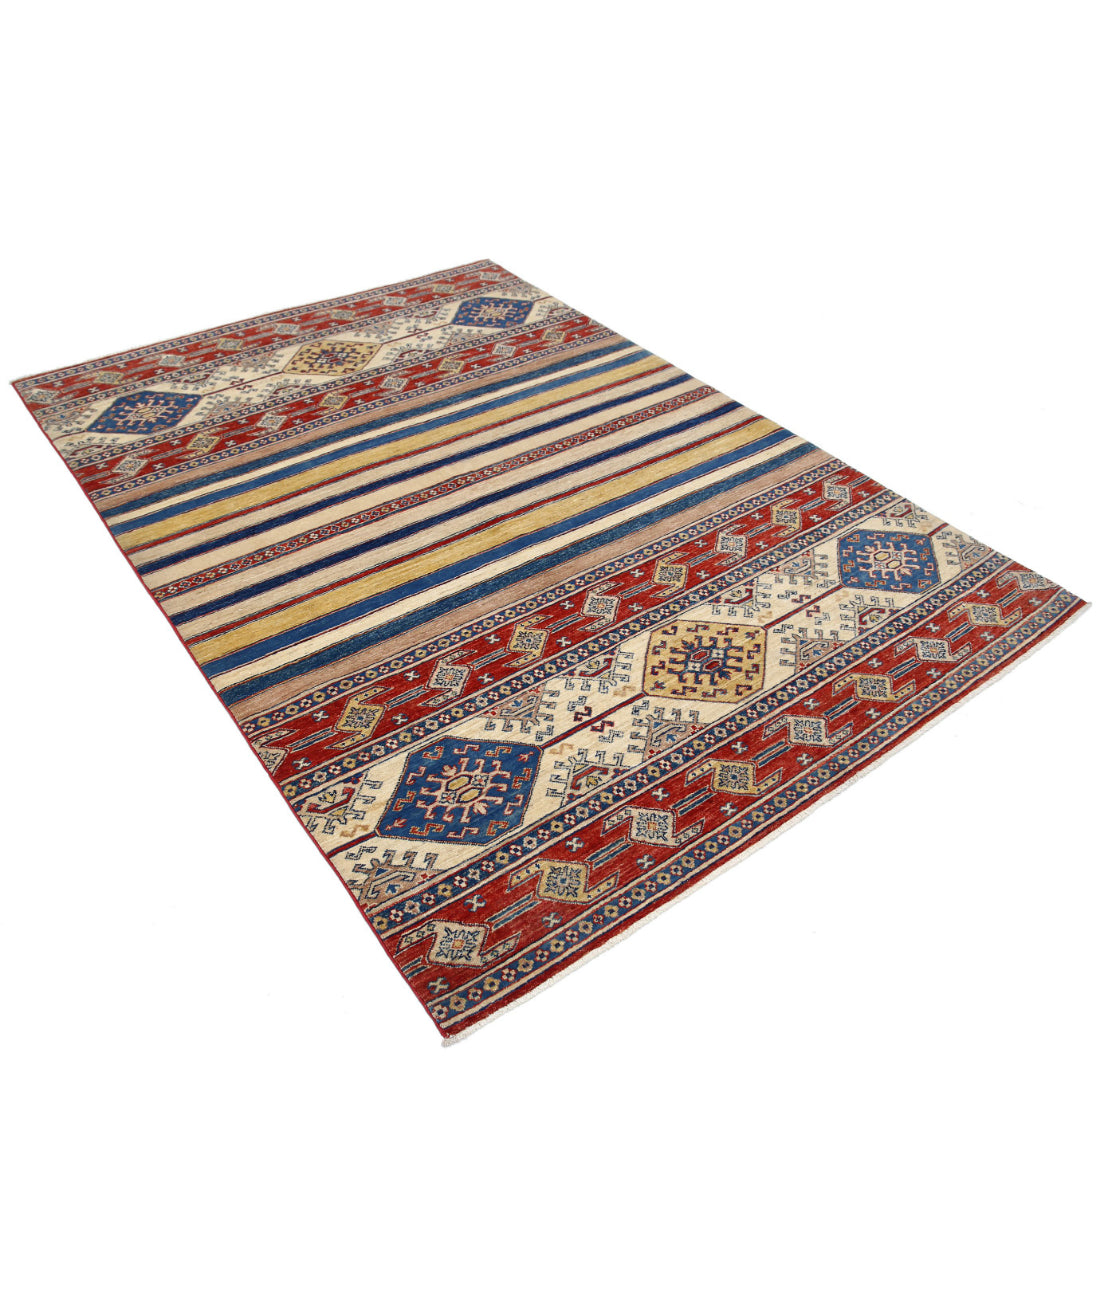 Hand Knotted Khurjeen Wool Rug - 5'6'' x 7'7'' 5'6'' x 7'7'' (165 X 228) / Multi / Multi